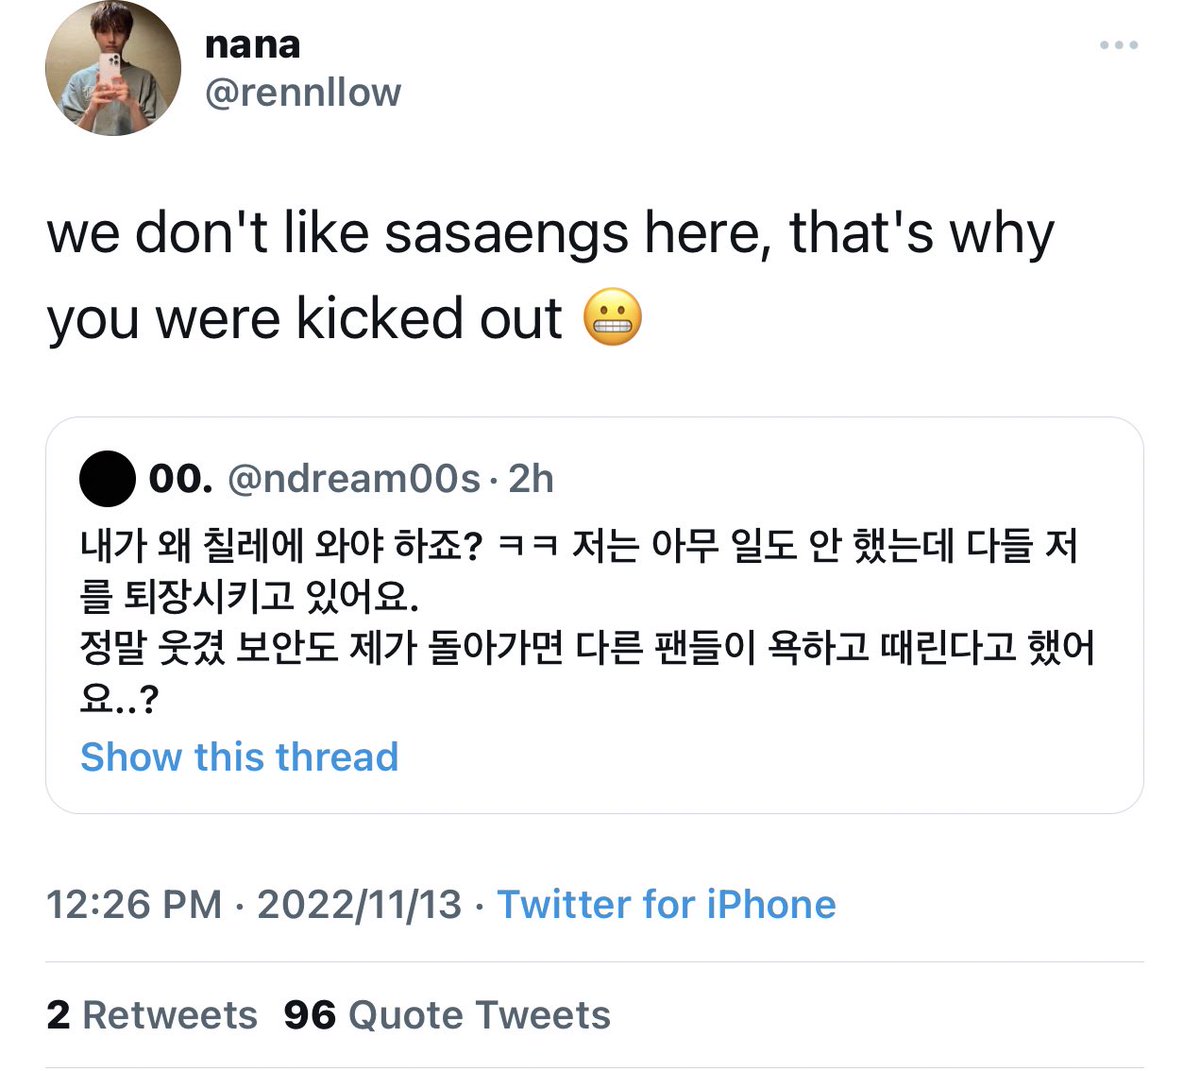 Blocking fans like them because they don’t know the difference between a ssng and a fansite. You don’t deserve any content from us.